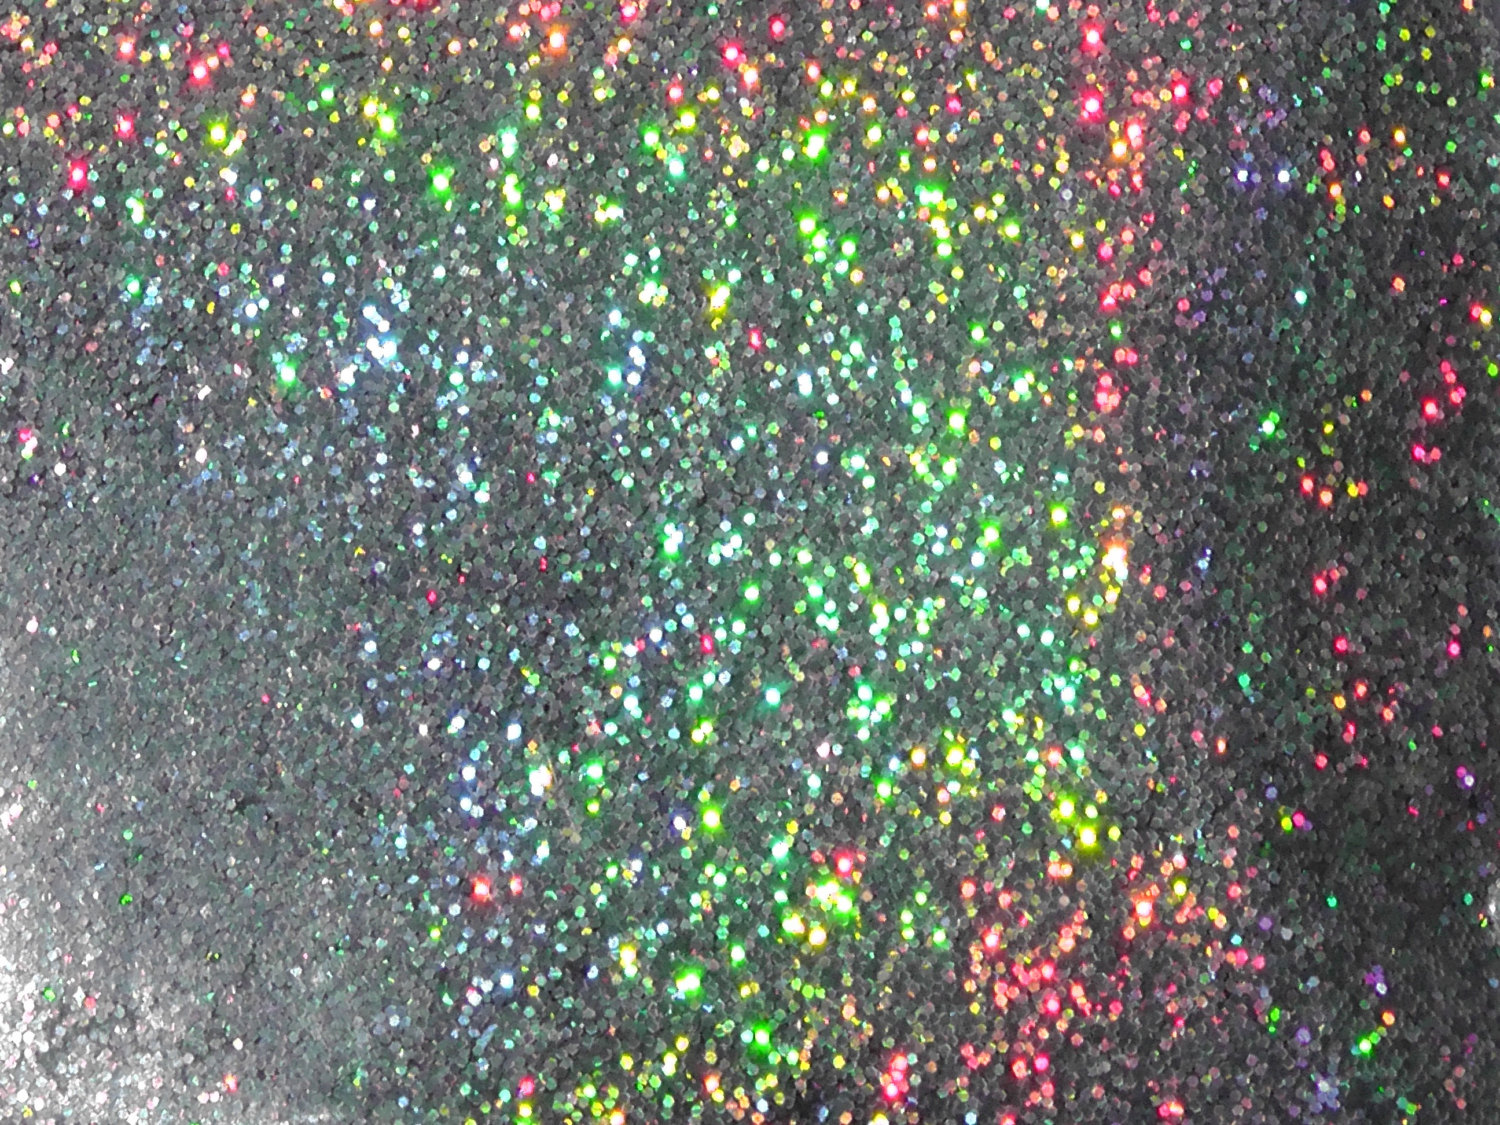 Silver holographic glitter from Etsy shop Glitz Galaxy